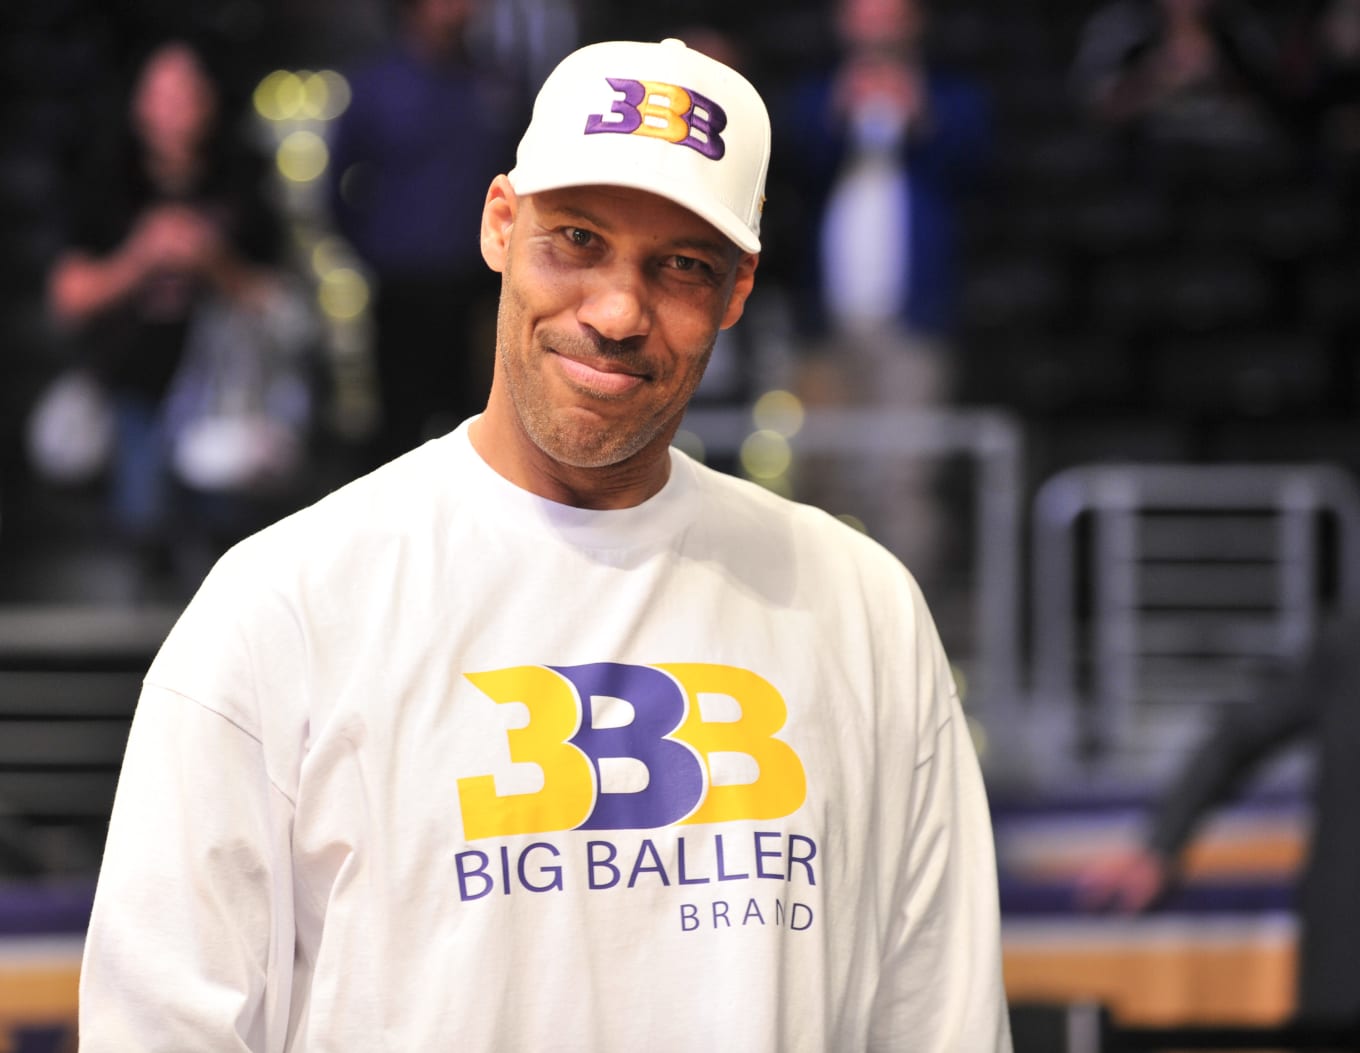 Lavar Ball Re-Launches Big Baller Brand | Sole Collector